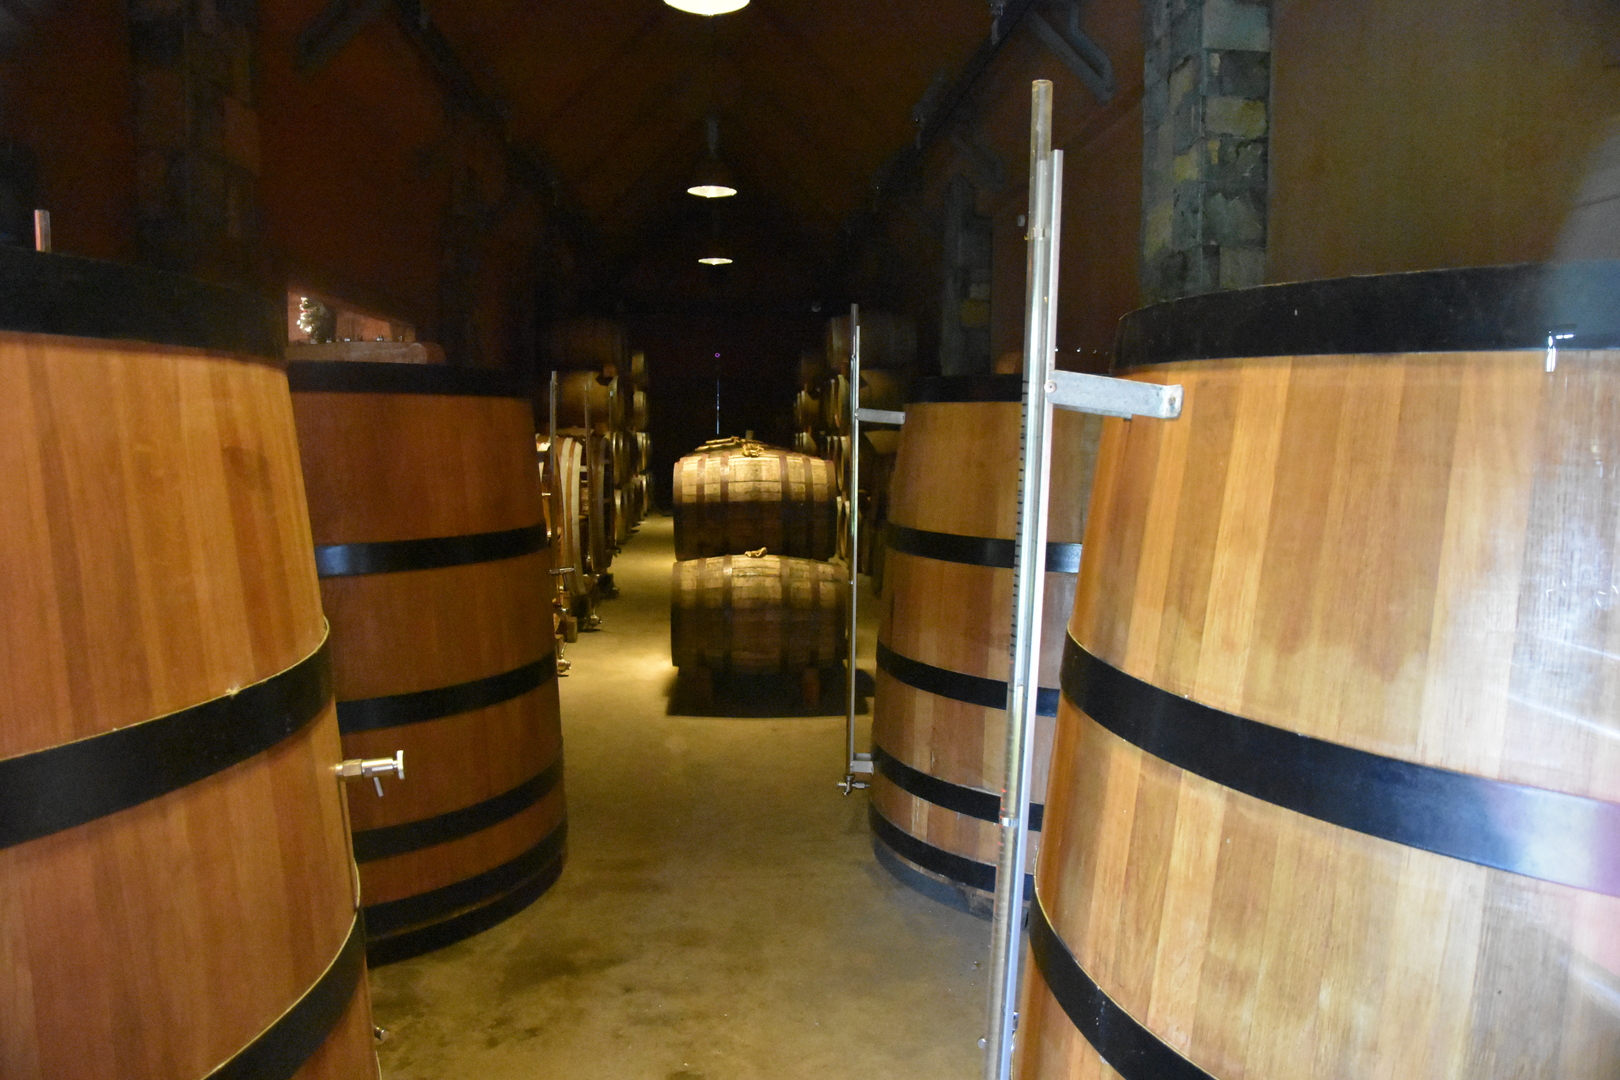 Rhumerie de Chamarel :: leaving the rum in the barrels to age in peace